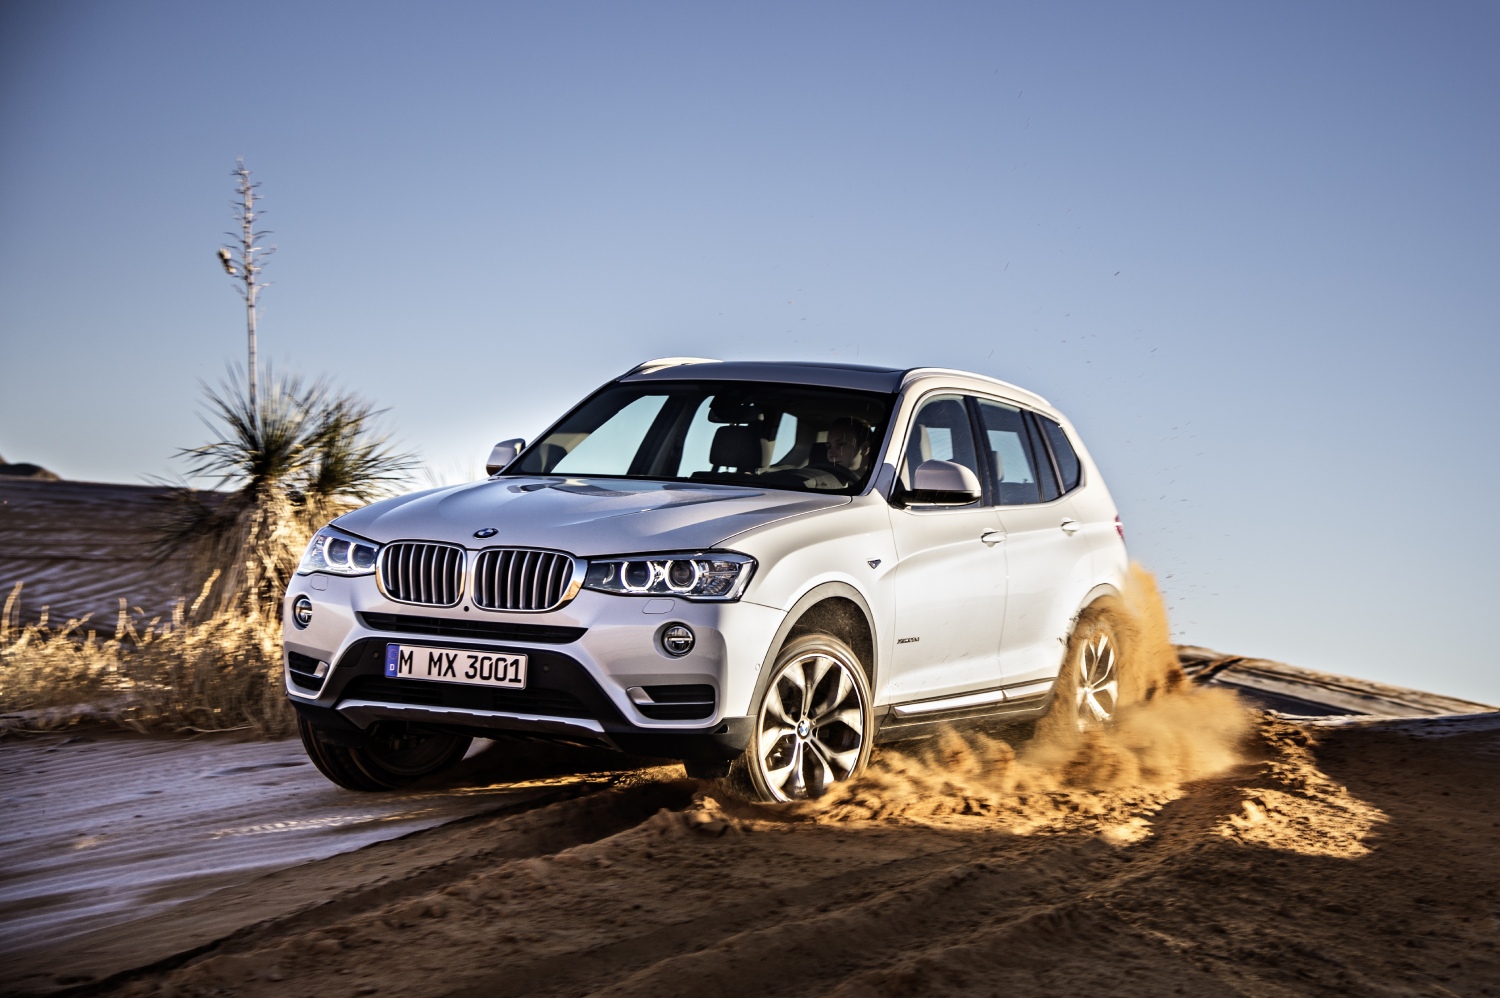 These fuel-efficient SUVs from 2015 include the BMW X3 diesel